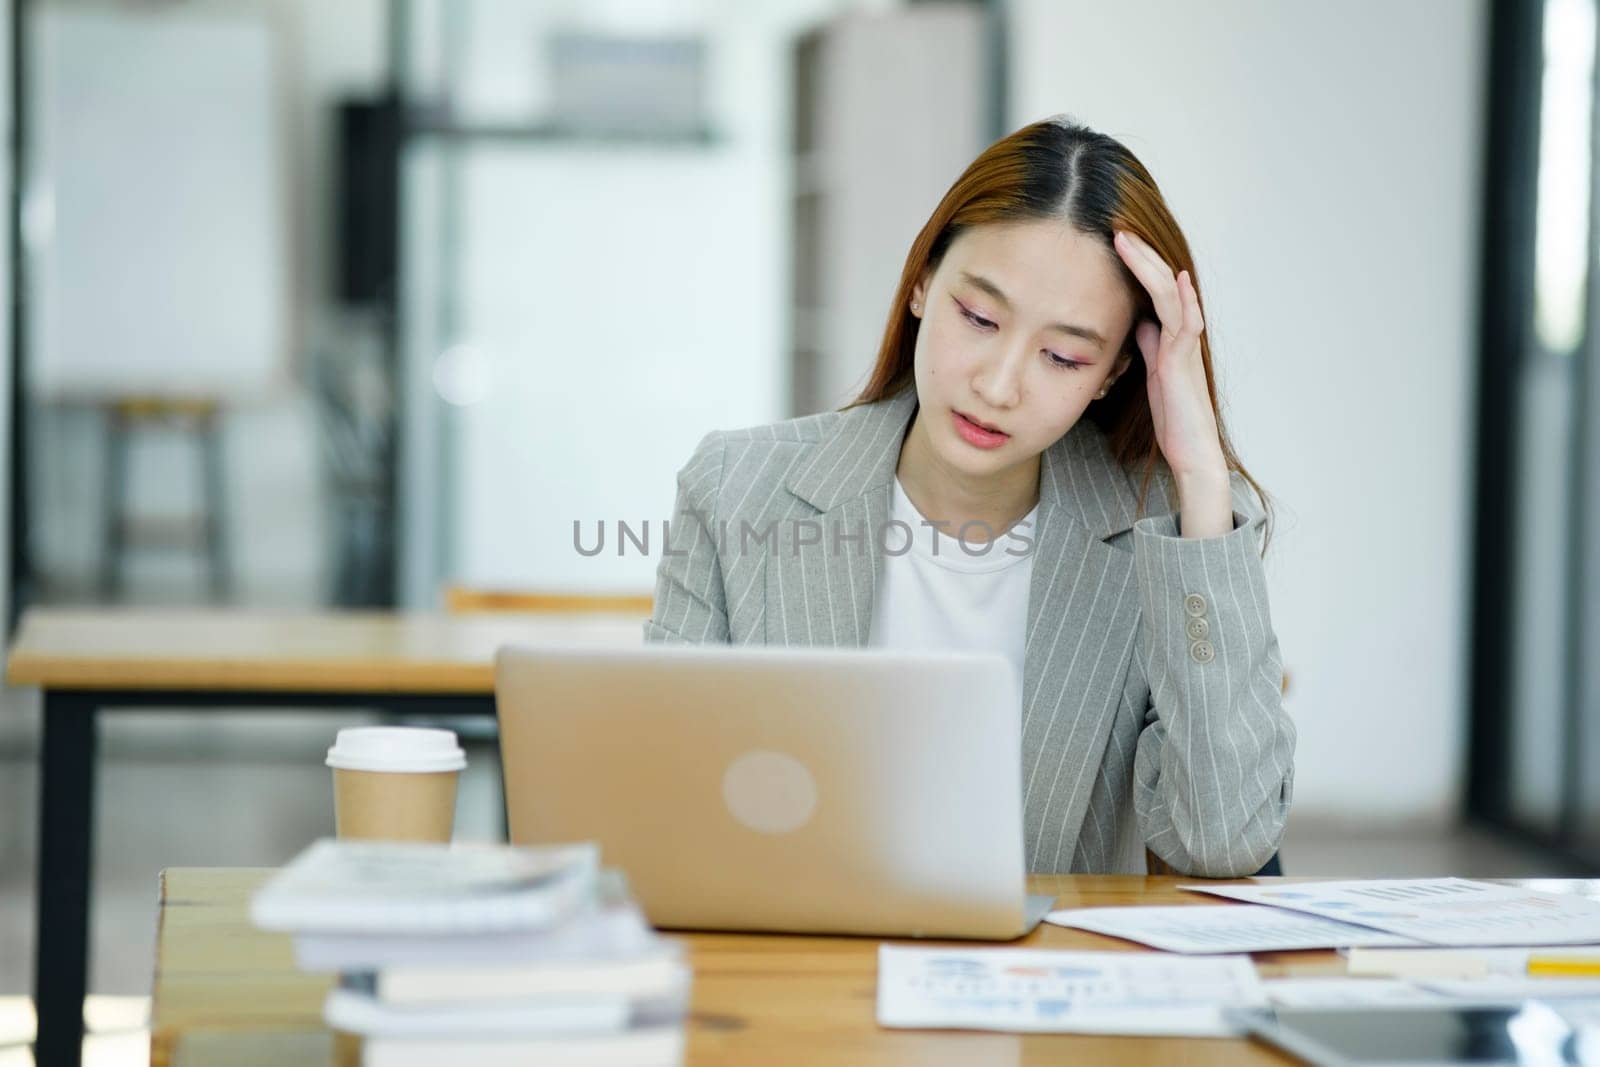 Female employees are stressed and tired. Headache from thinking and pressure from work.